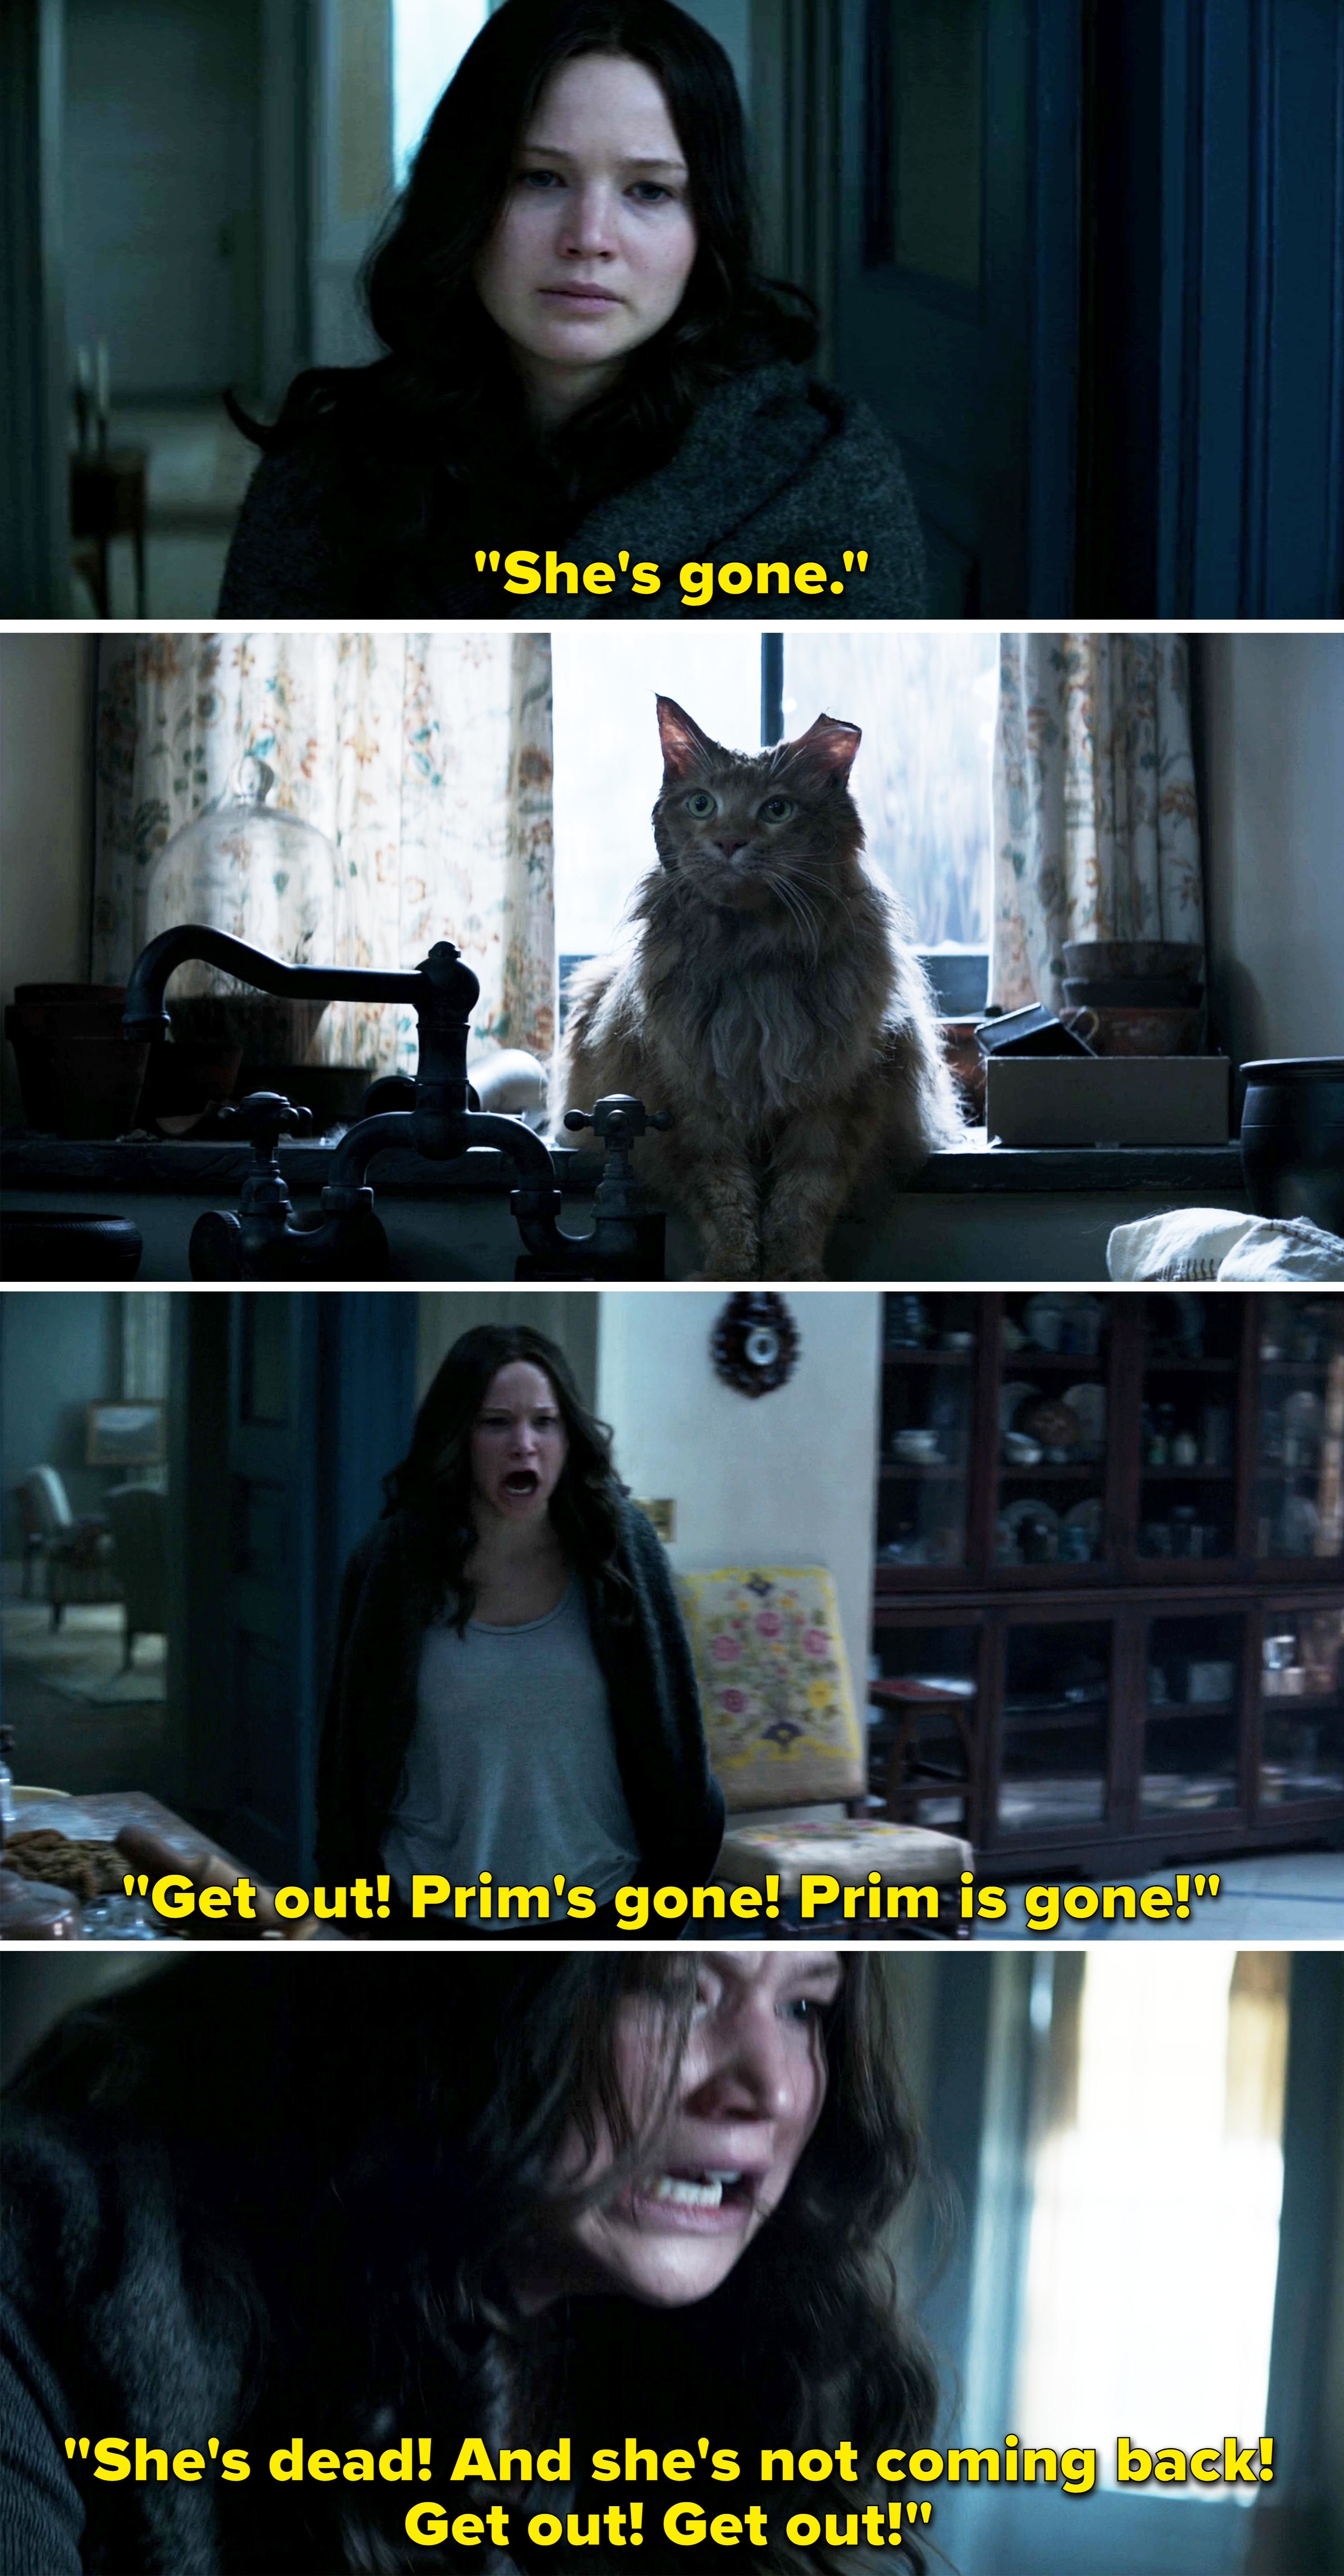 katniss yelling at the cat, she&#x27;s dead and she&#x27;s not coming back, get out get out!